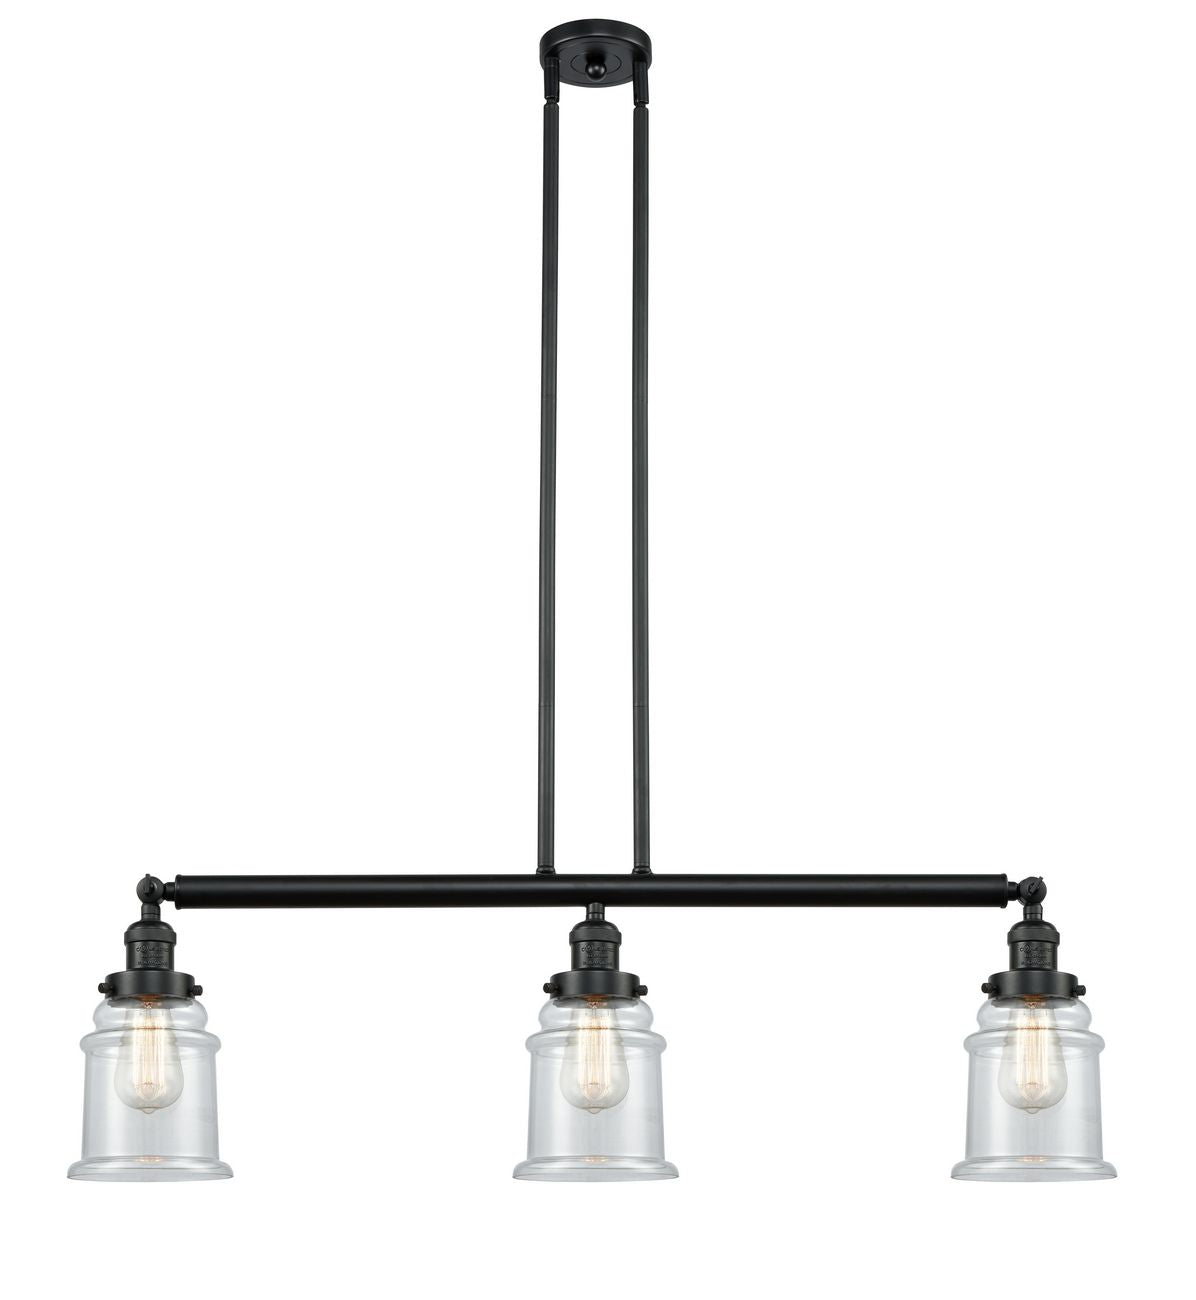 213-BK-G182 3-Light 38.5" Matte Black Island Light - Clear Canton Glass - LED Bulb - Dimmensions: 38.5 x 6 x 11<br>Minimum Height : 21.5<br>Maximum Height : 45.5 - Sloped Ceiling Compatible: Yes